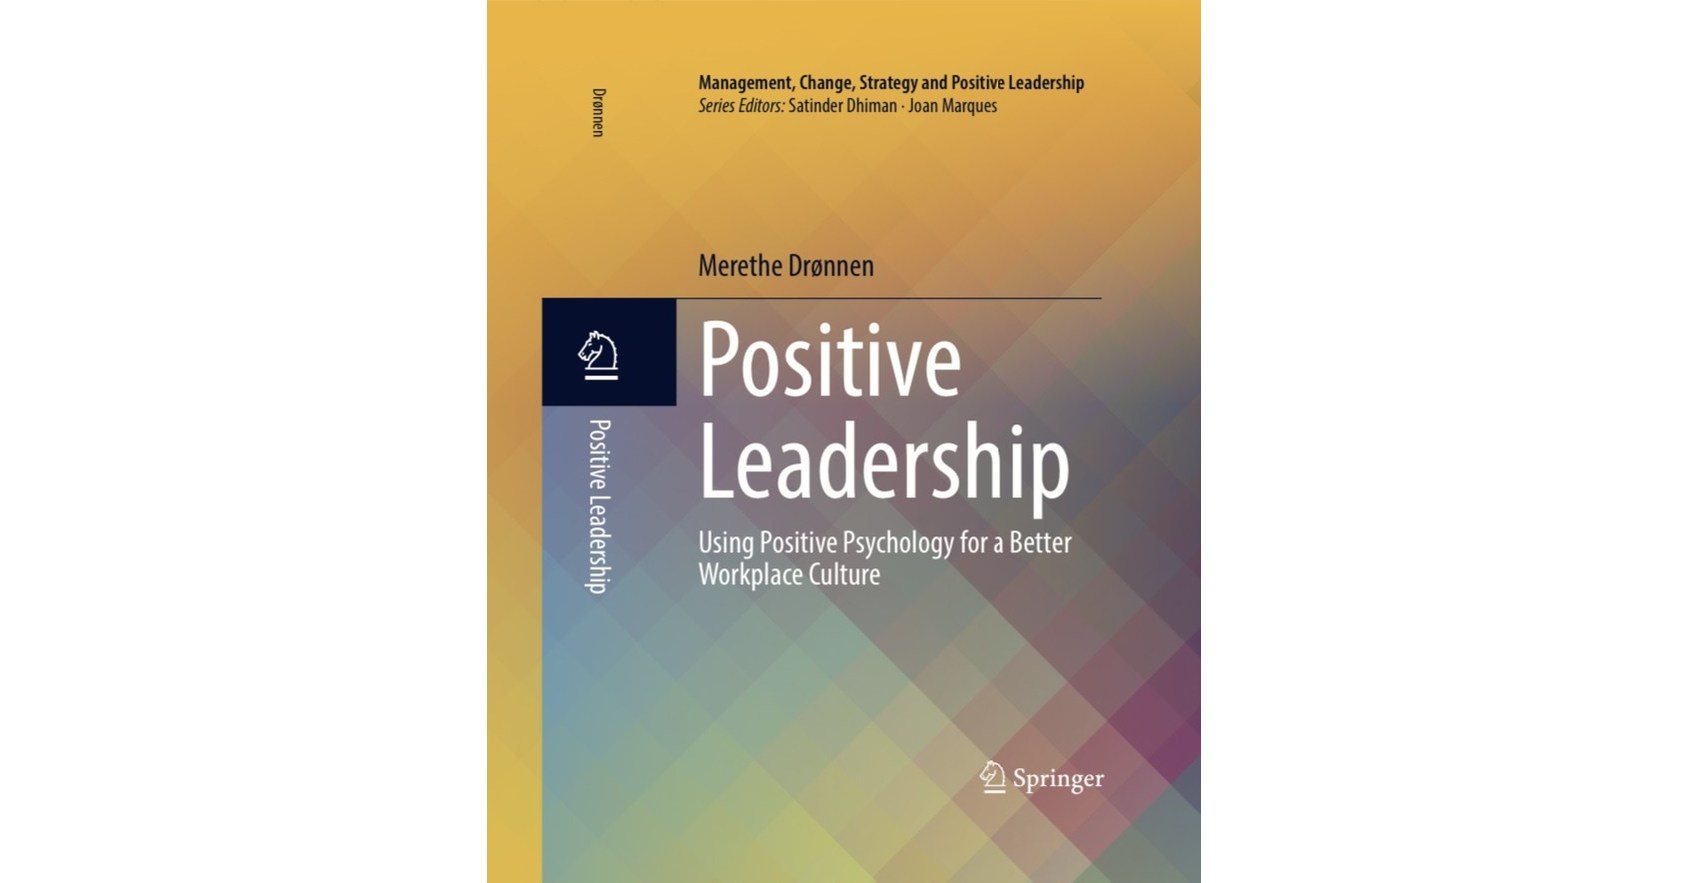 New Positive Leadership Book by Dr. Merethe Drønnen, Ph.D. and Associate Professor at the School of Business and Leadership, Arctic University of Norway, Turns the Epidemic of "Quiet Quitting" and "The Great Resignation" into Incre